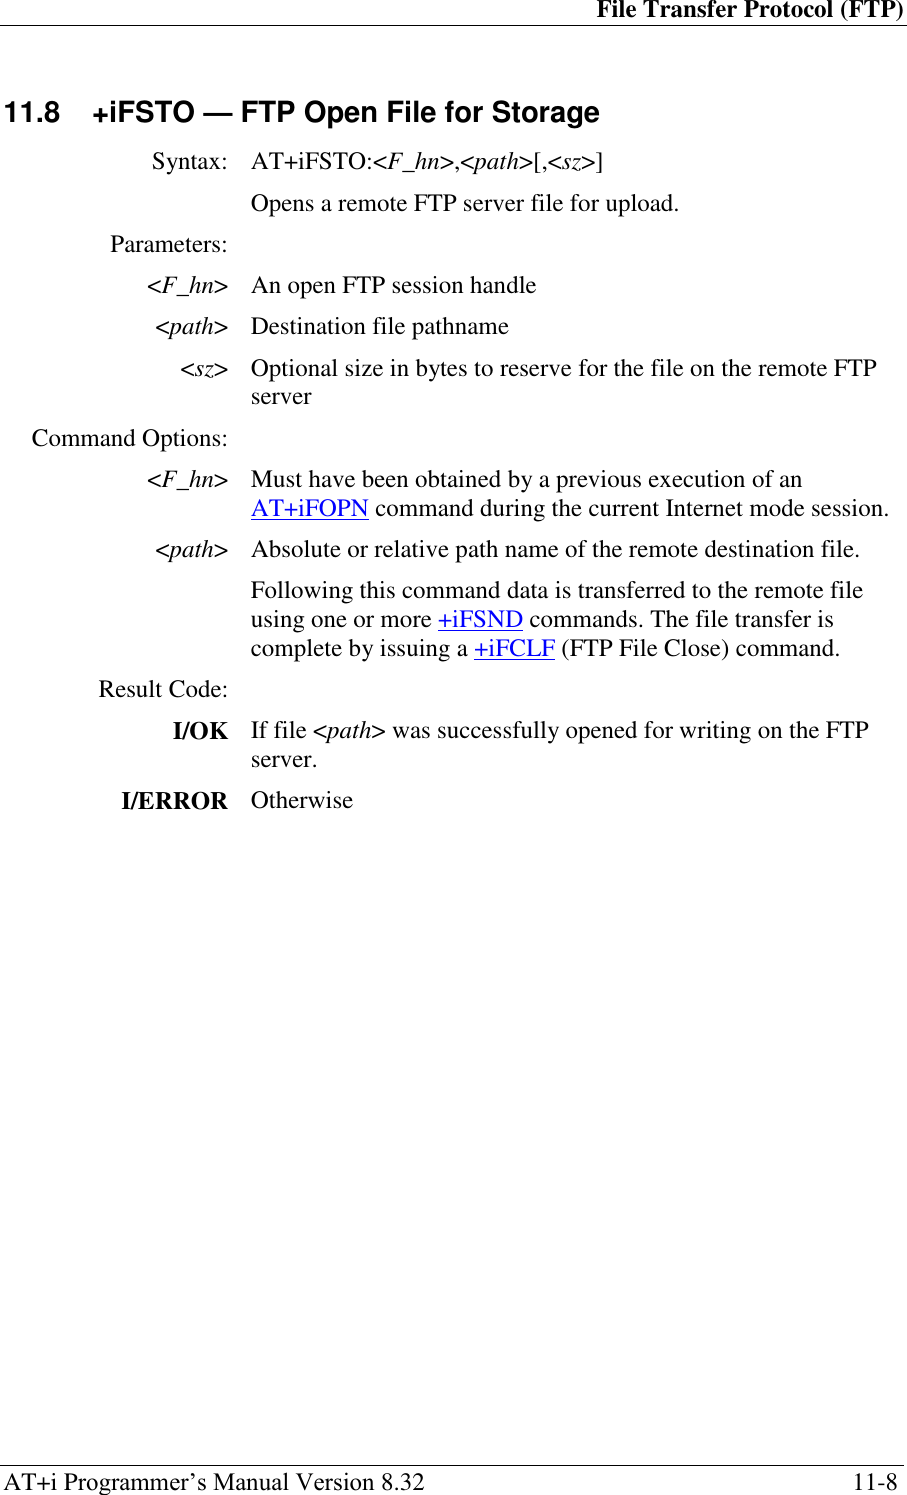 File Transfer Protocol (FTP) AT+i Programmer‘s Manual Version 8.32  11-8 11.8  +iFSTO — FTP Open File for Storage  Syntax: AT+iFSTO:&lt;F_hn&gt;,&lt;path&gt;[,&lt;sz&gt;]  Opens a remote FTP server file for upload. Parameters:  &lt;F_hn&gt; An open FTP session handle &lt;path&gt; Destination file pathname &lt;sz&gt; Optional size in bytes to reserve for the file on the remote FTP server Command Options:  &lt;F_hn&gt; Must have been obtained by a previous execution of an AT+iFOPN command during the current Internet mode session. &lt;path&gt; Absolute or relative path name of the remote destination file.  Following this command data is transferred to the remote file using one or more +iFSND commands. The file transfer is complete by issuing a +iFCLF (FTP File Close) command. Result Code:  I/OK If file &lt;path&gt; was successfully opened for writing on the FTP server. I/ERROR Otherwise  